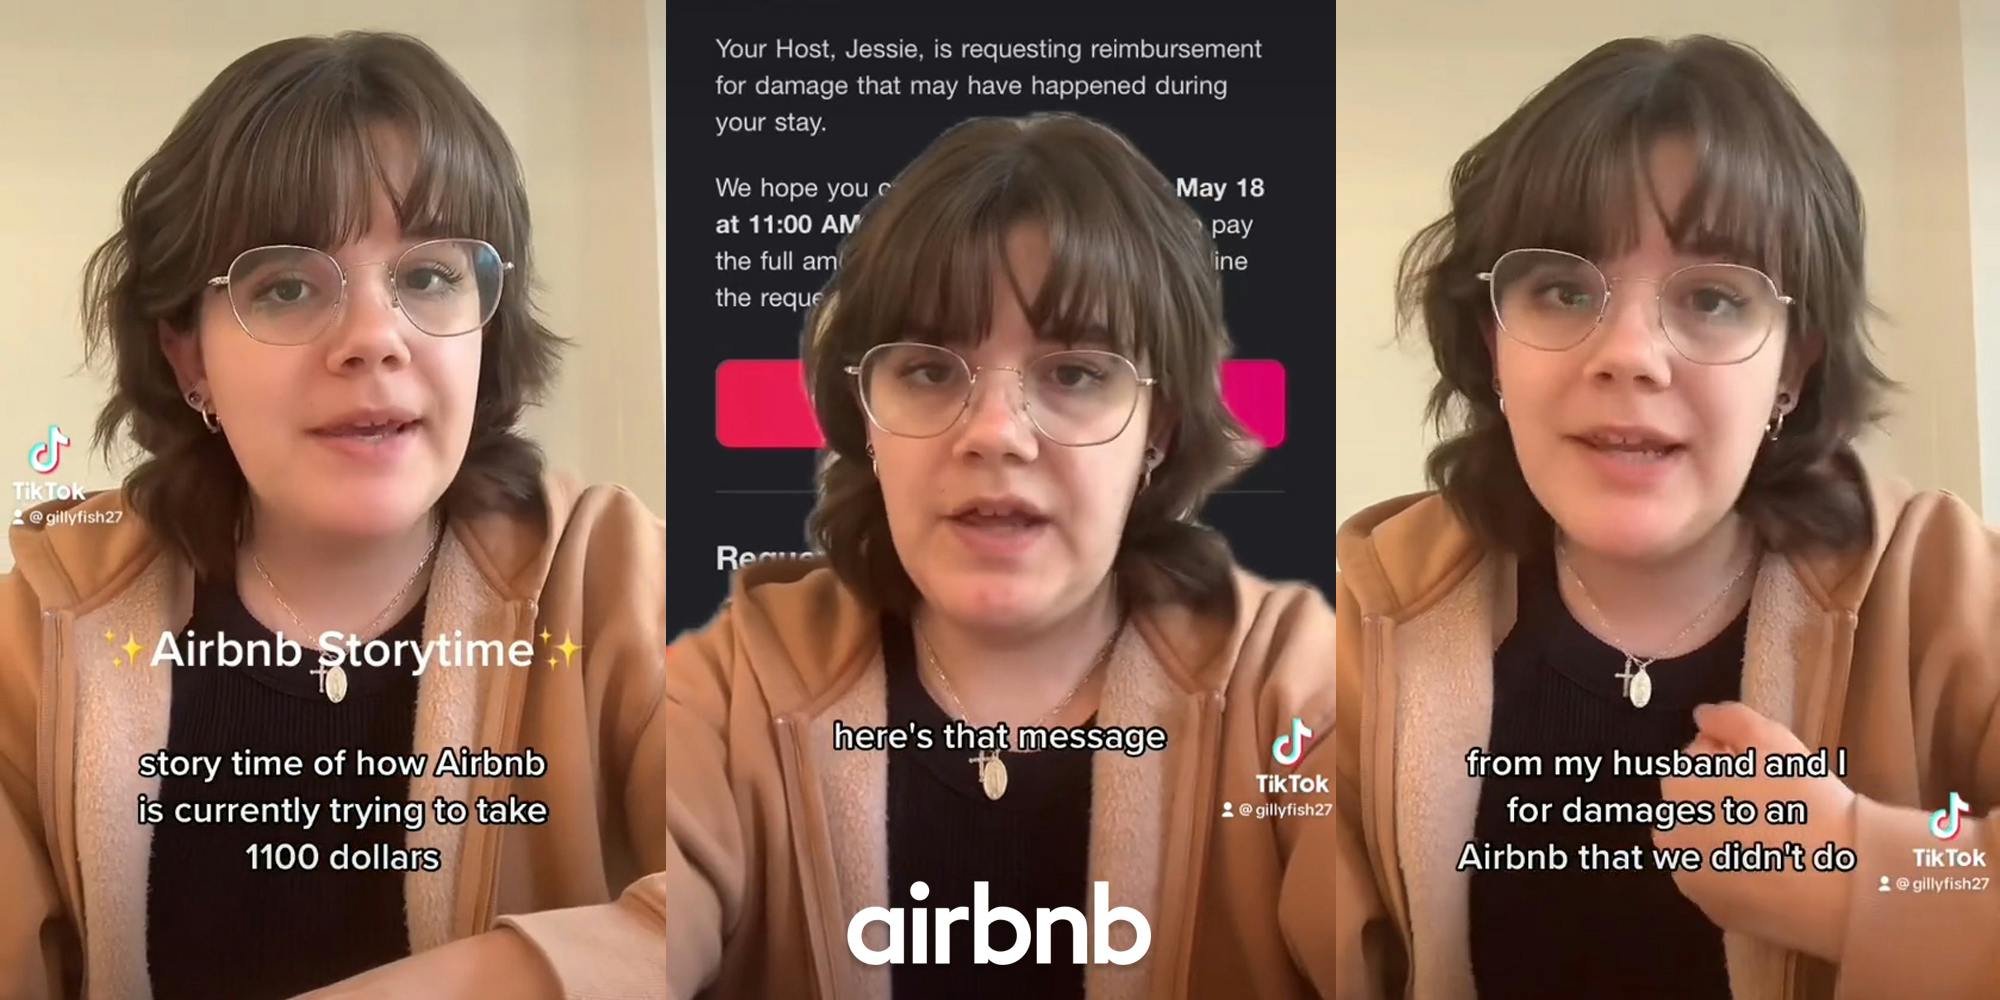 Airbnb customer speaking with caption "Airbnb Storytime story time of how Airbnb is currently trying to take 1100 dollars" (l) Airbnb customer greenscreen TikTok speaking over Airbnb request with caption "here's that message" (c) Airbnb customer speaking with caption "from my husband and I for damages to an Airbnb that we didn't do" (r)